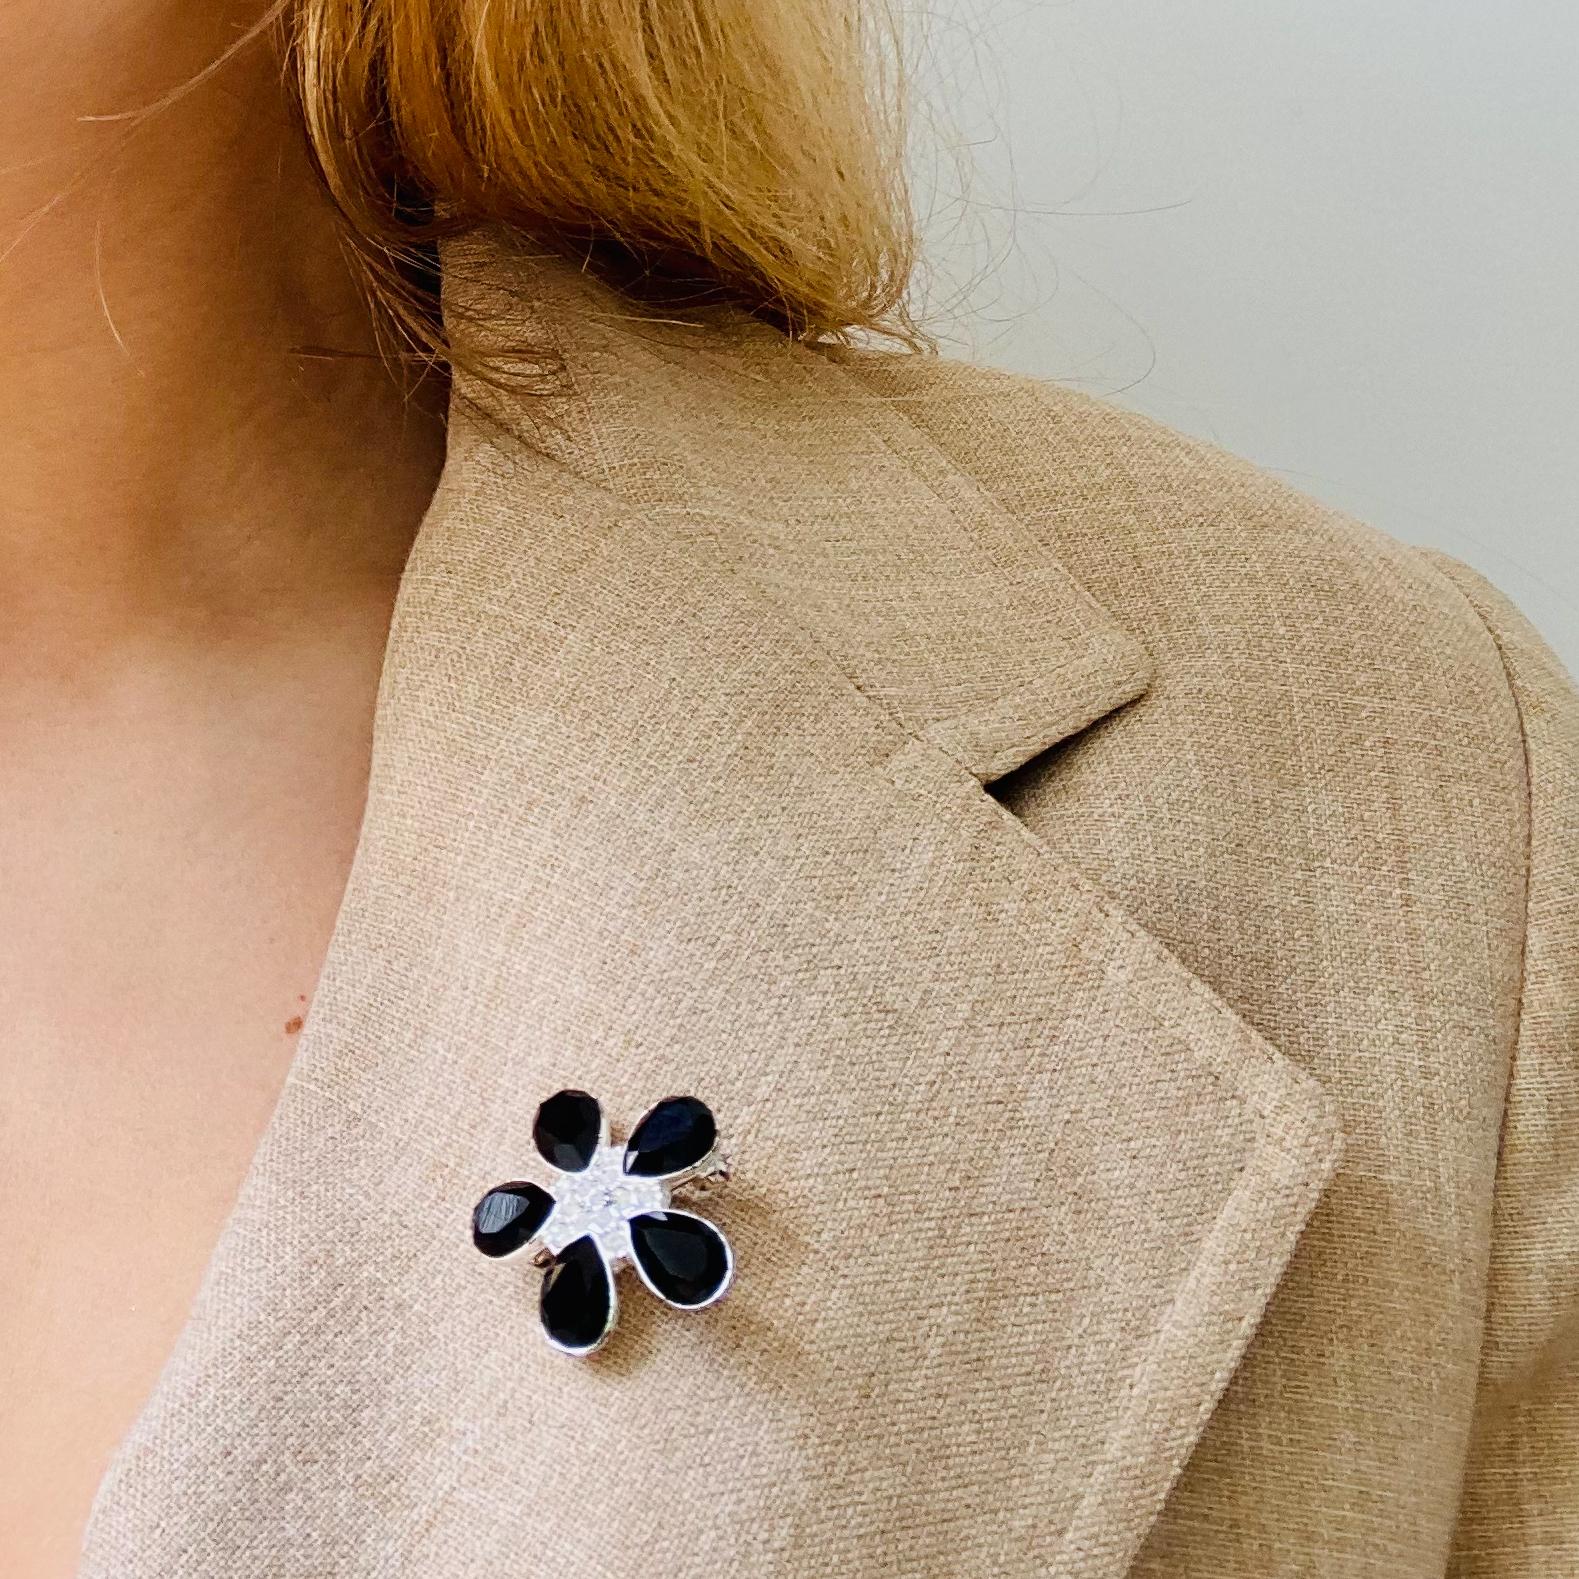 Givenchy Vintage 1980s Brooch
Beautifully delicate floral brooch from the iconic House of Hubert de Givenchy
This cute little brooch will brighten up your favourite coats and jackets

Detail
-Made in the 1980s
-Crafted from gold plated metal
-Smoky